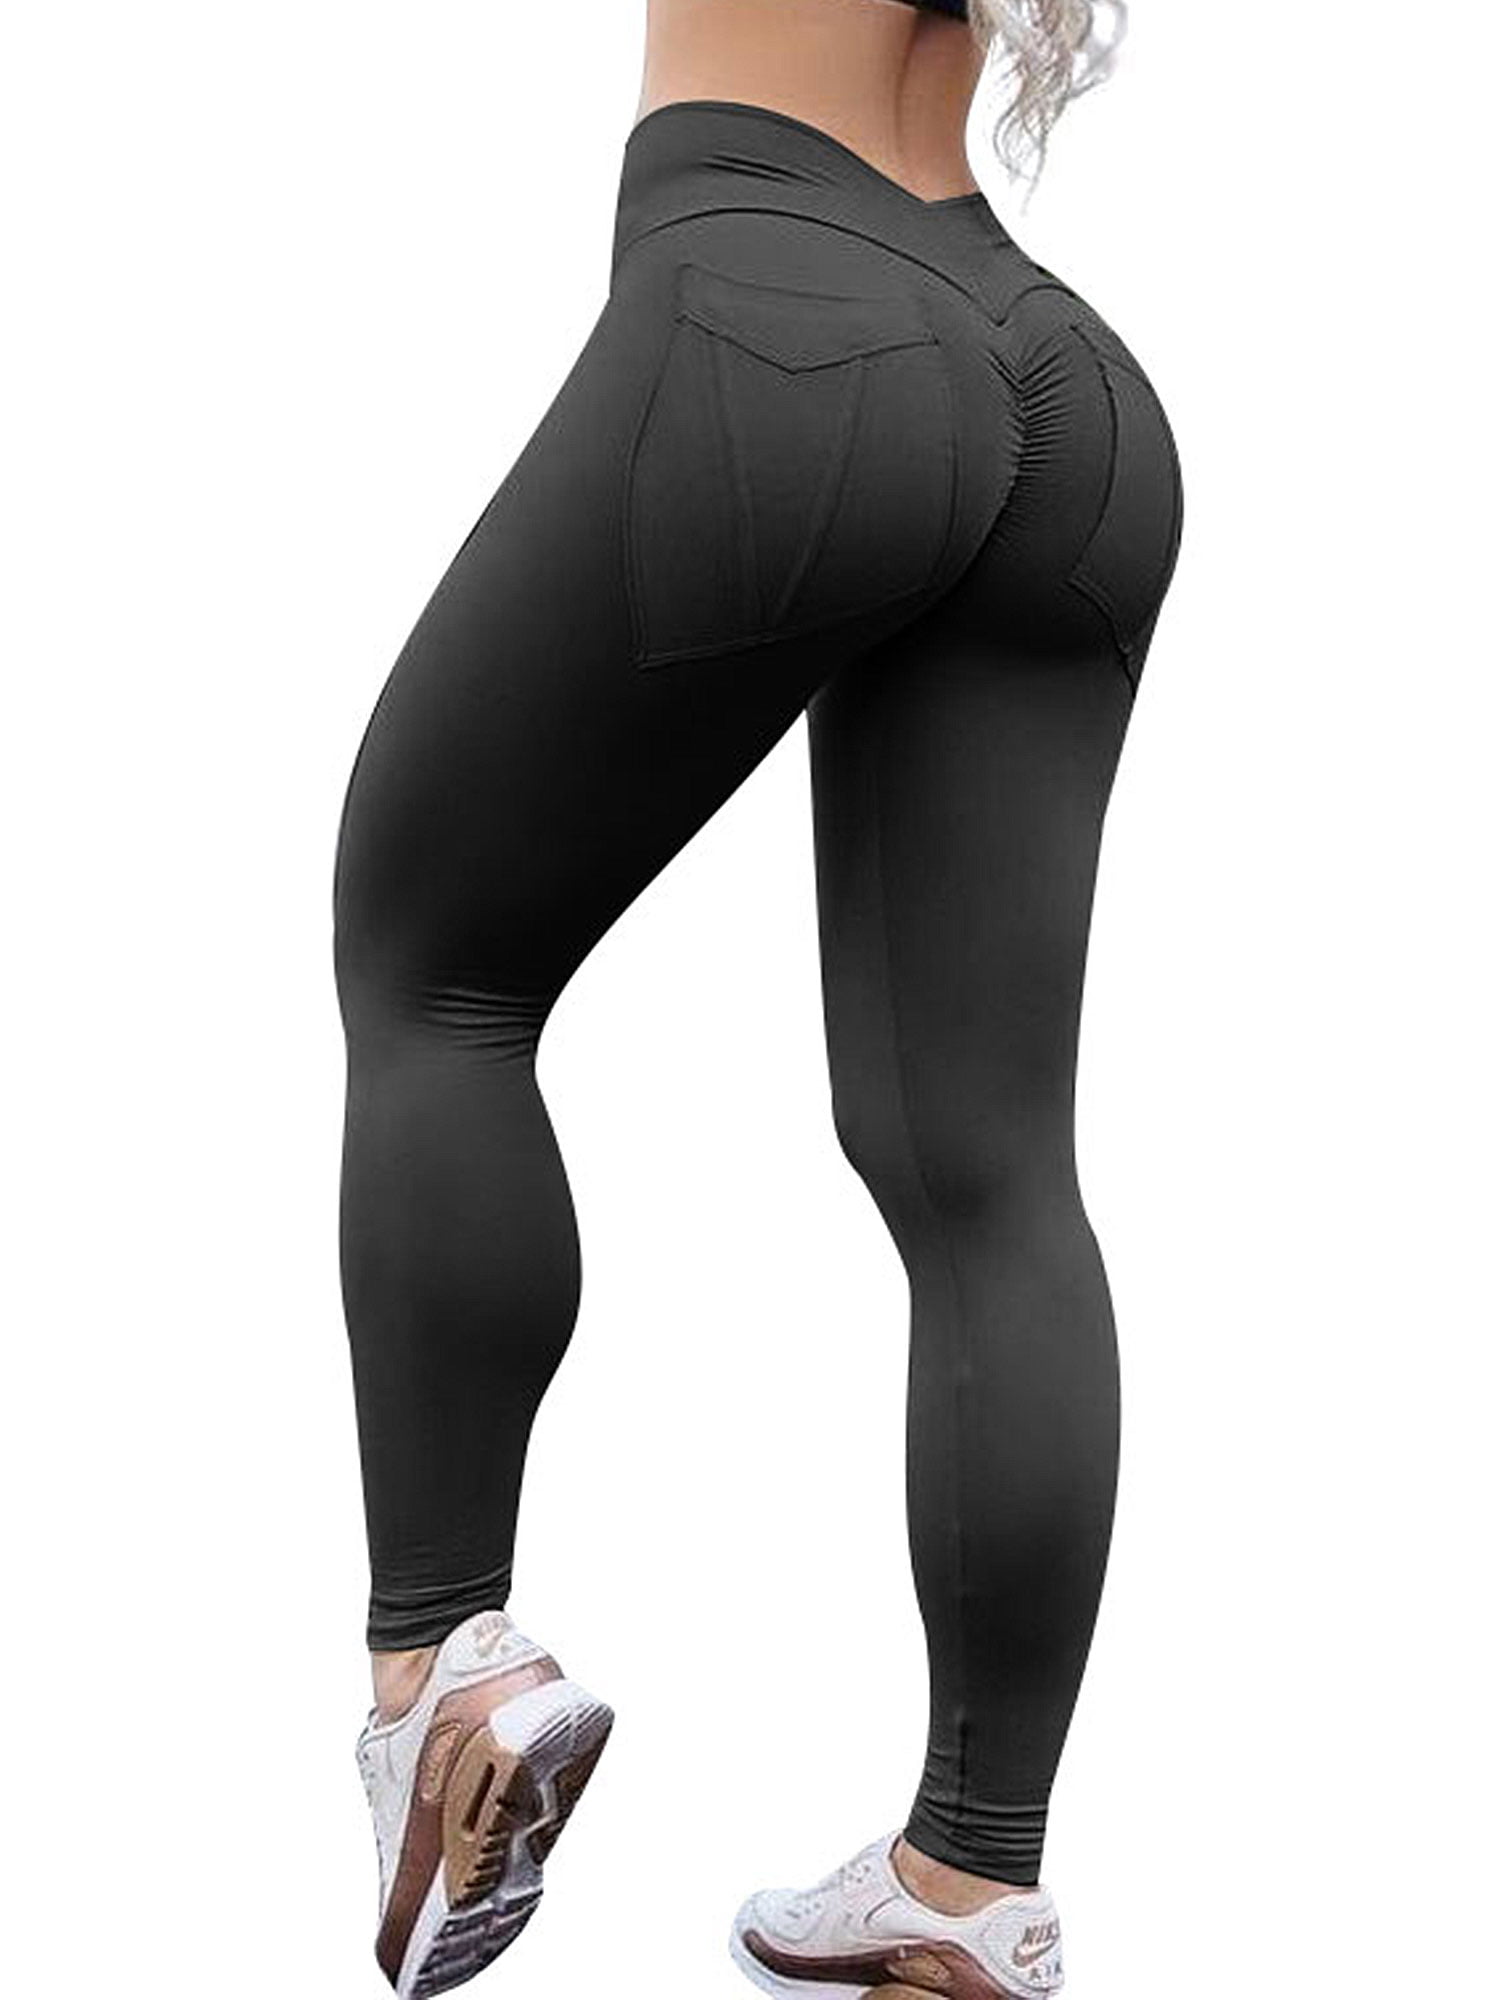 Details about   Women High Waist Yoga Pants Scrunch Push Up Leggings Gym Workout Ruched Trousers 